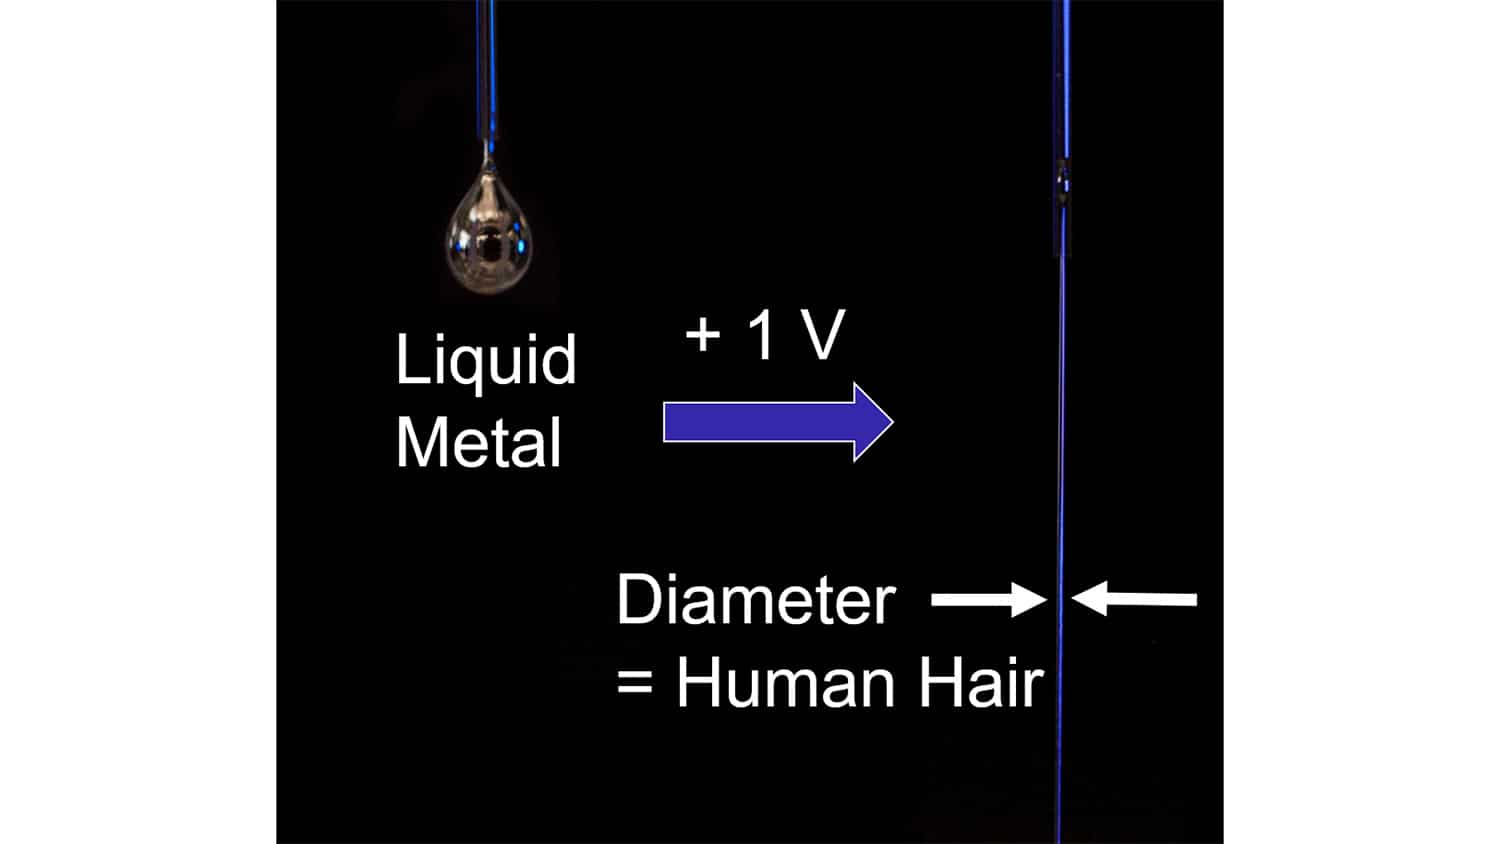 A droplet of liquid metal turns to a stream of liquid metal when a small voltage is applied.